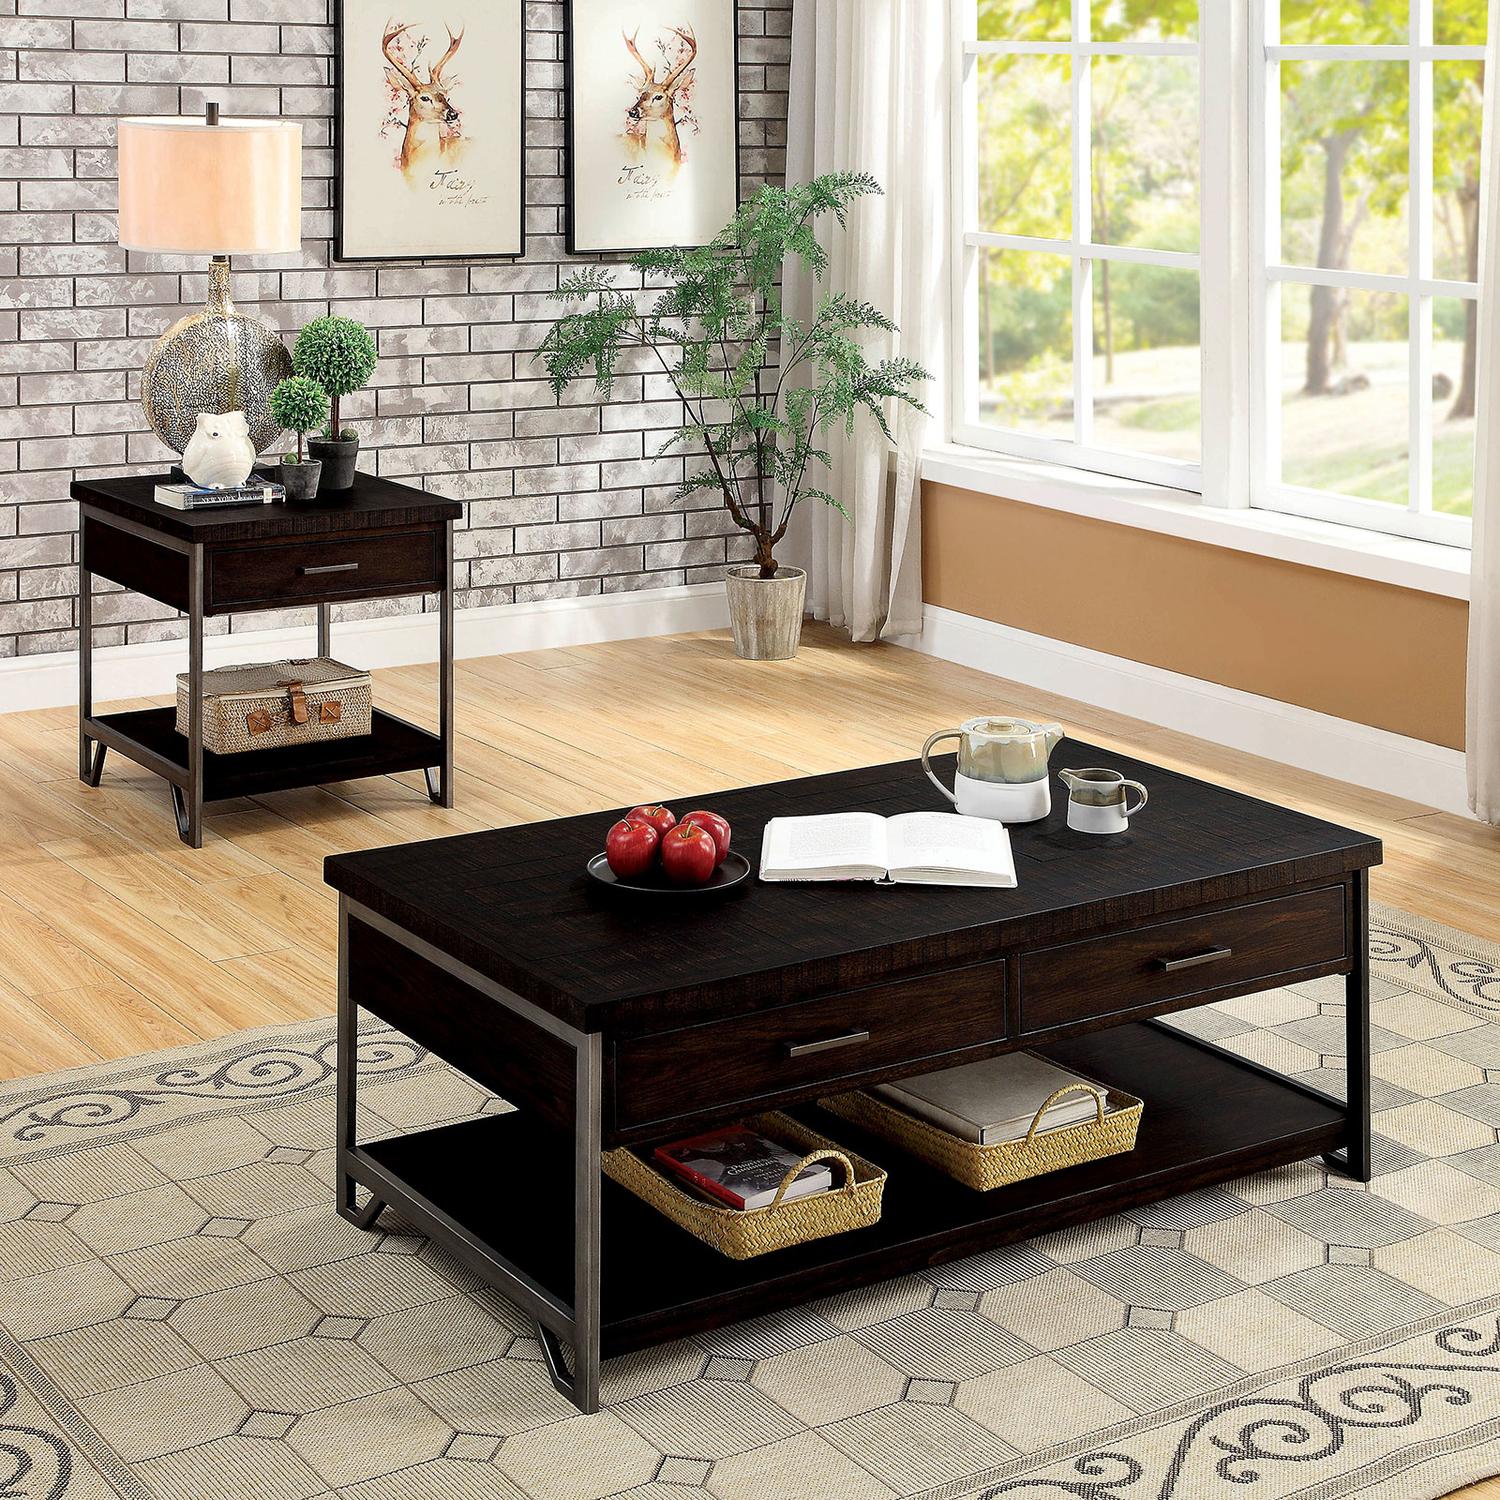 Transitional Coffee Table and 2 End Tables CM4499C-3PC Wasta CM4499C-3PC in Dark Oak 